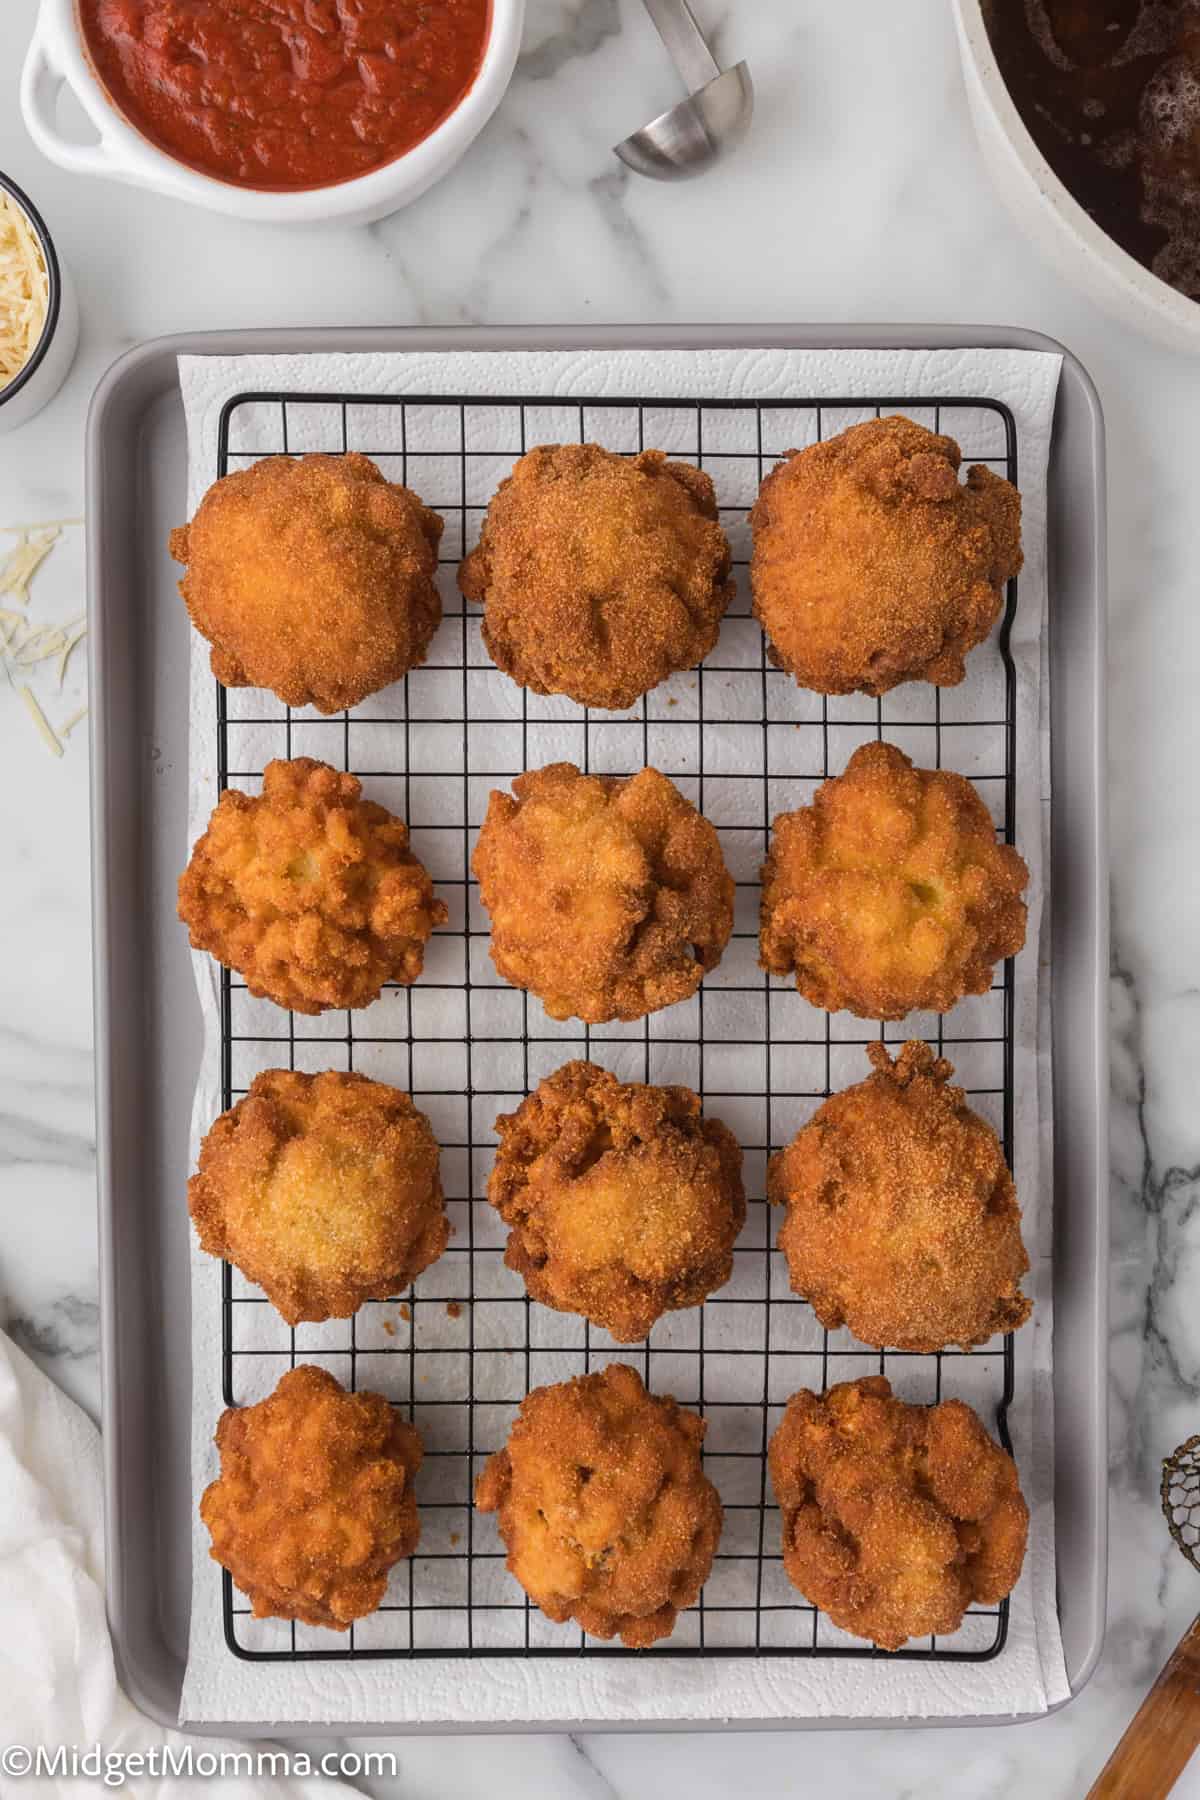 Freshly fried mac and cheese balls arranged on a cooling rack over a baking sheet, with marinara sauce and a spoon visible in the background.